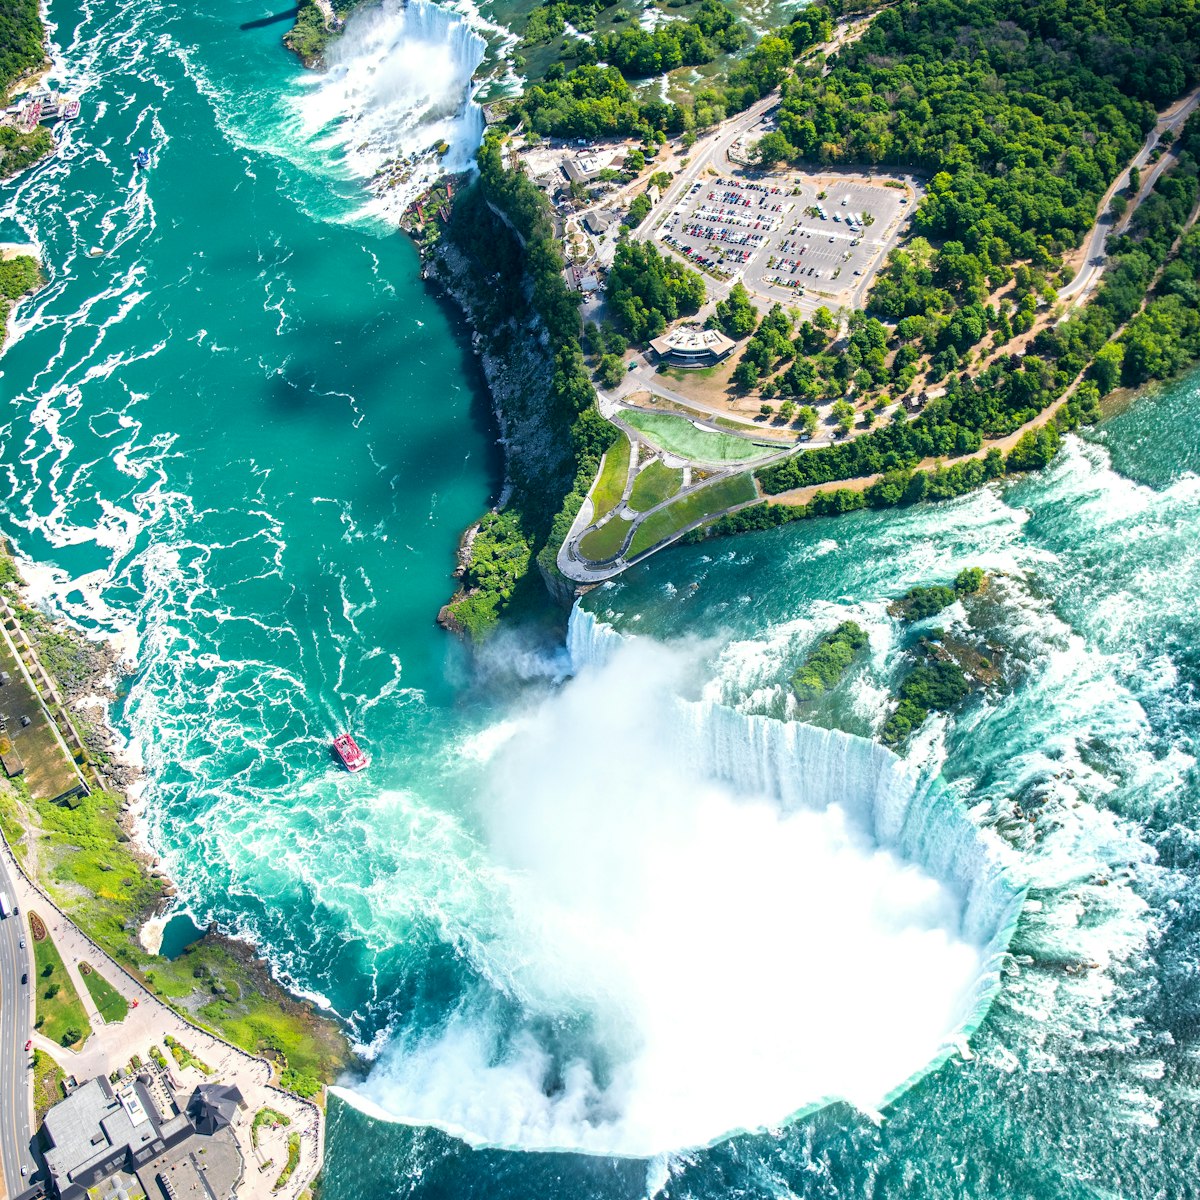 Aerial of Horseshoe Falls at Niagara Falls.
546768265
aerial, amazing, american, awesome, beautiful, beauty, blue, boats, bridge, canada, canadian, color, drop, fall, flow, helicopter view, horseshoe, landmark, landscape, light, maid, majestic, mist, natural, nature, new, niagara, north, ontario, outdoors, park, power, powerful, rainbow, rapids, river, rock, rocky, scenic, sky, spectacular, speed, stunning, toronto, tour, tourism, travel, view, water, waterfall